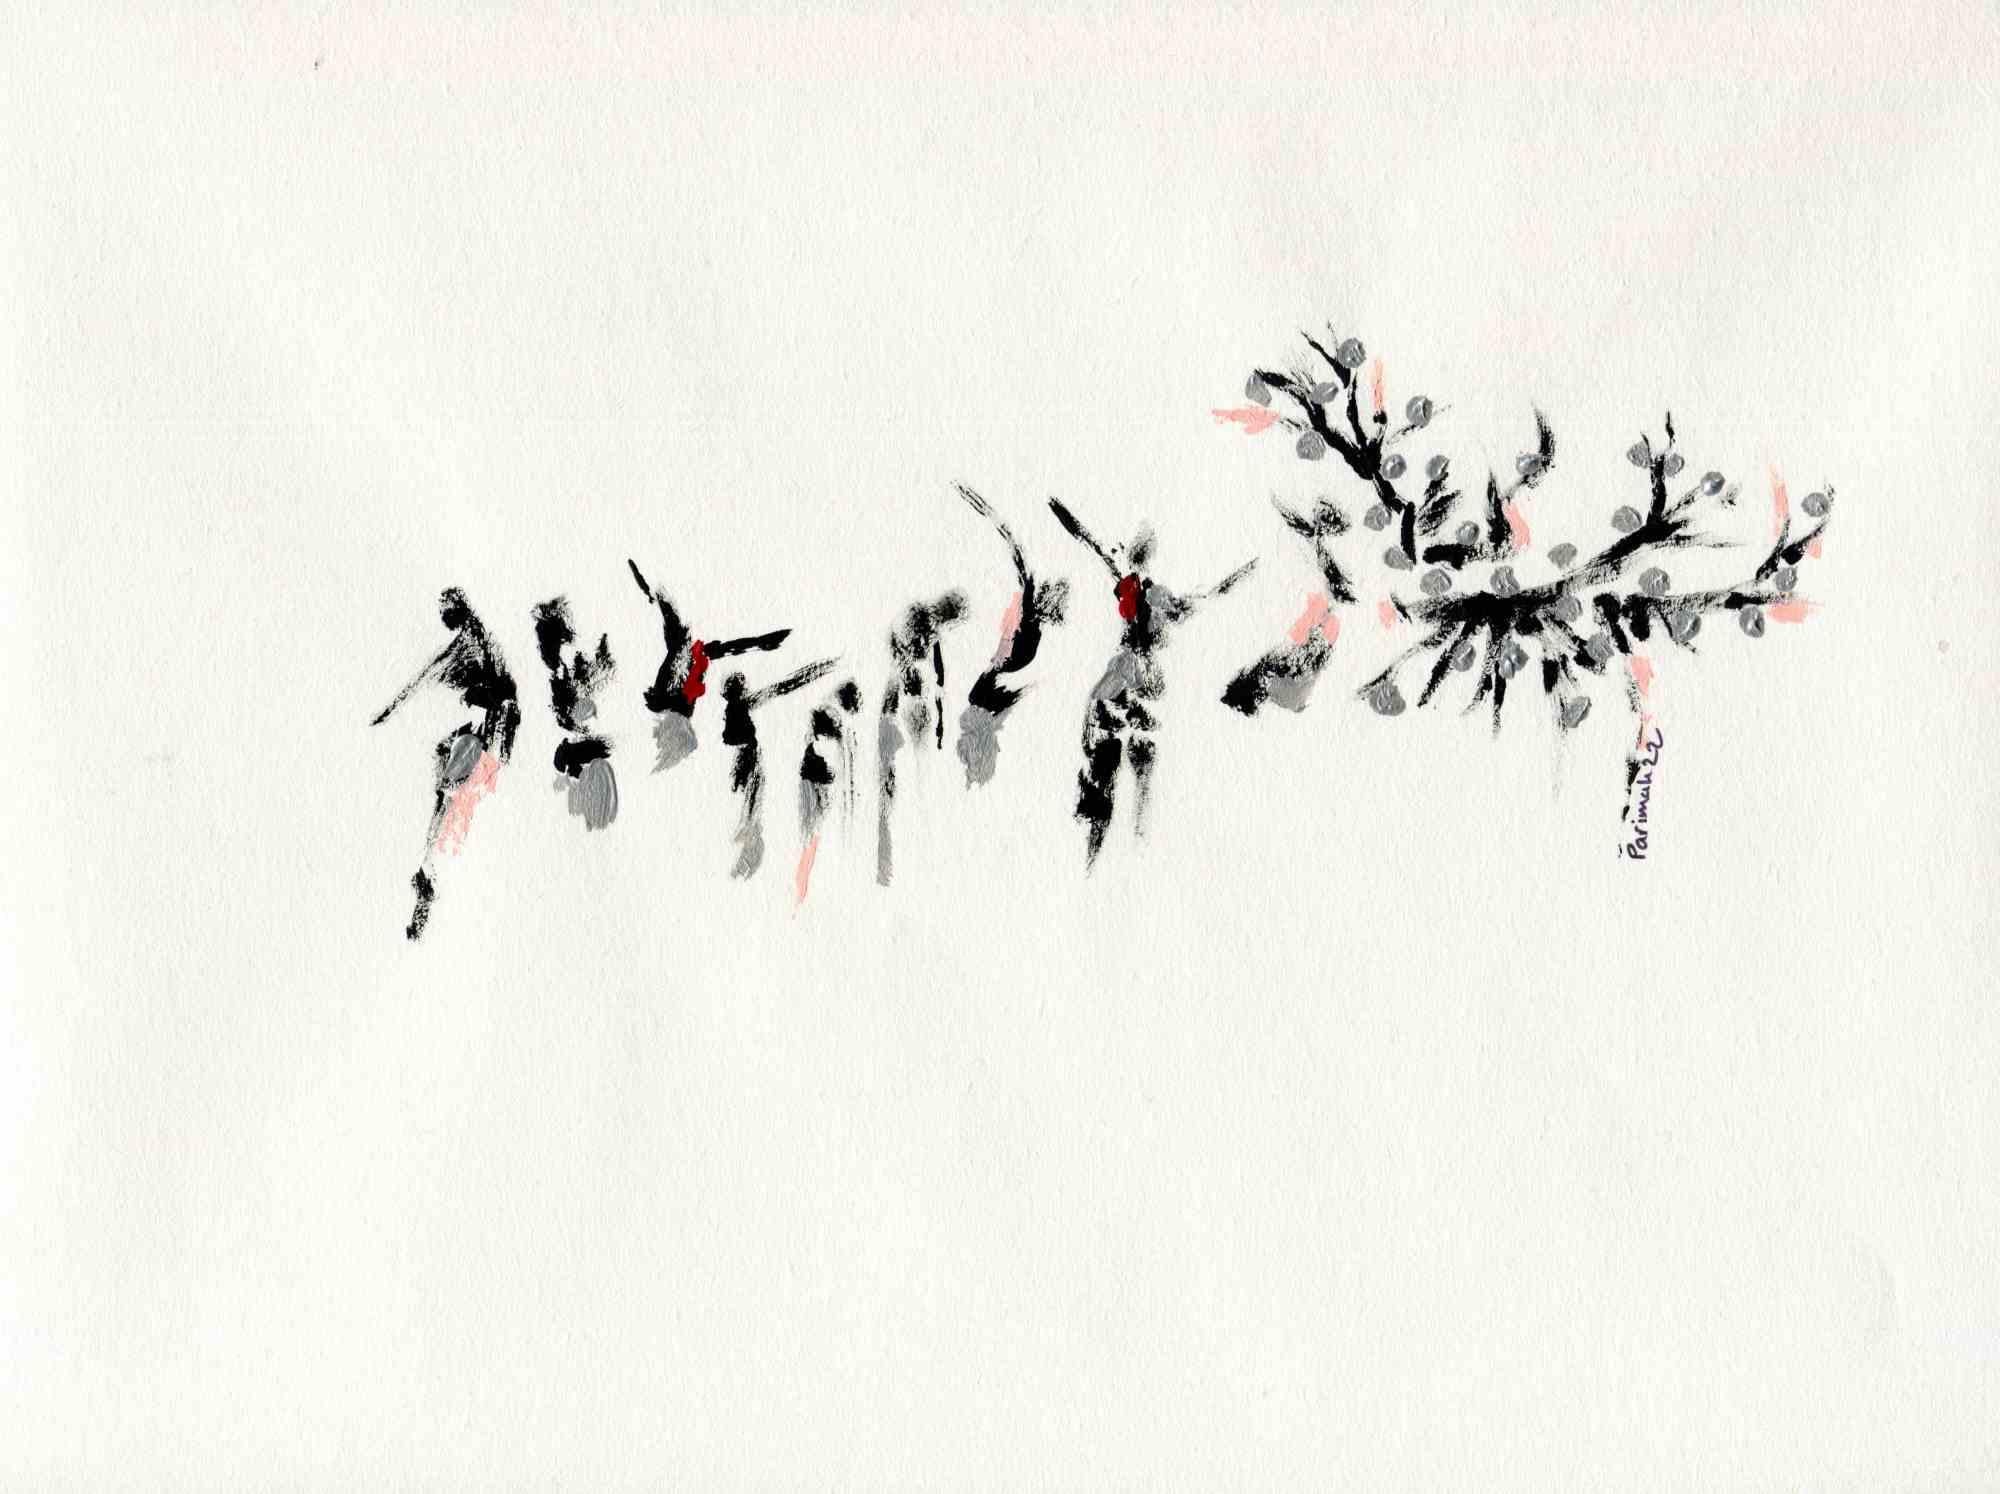 Sowing Silvery Season is a drawing realized by Iranian artist and poet Parimah Avani in 2022.

China ink and acrylic on ivory-colored Canson paper.

Hand-signed and dated.

 

Presented in a Personal exhibition of 